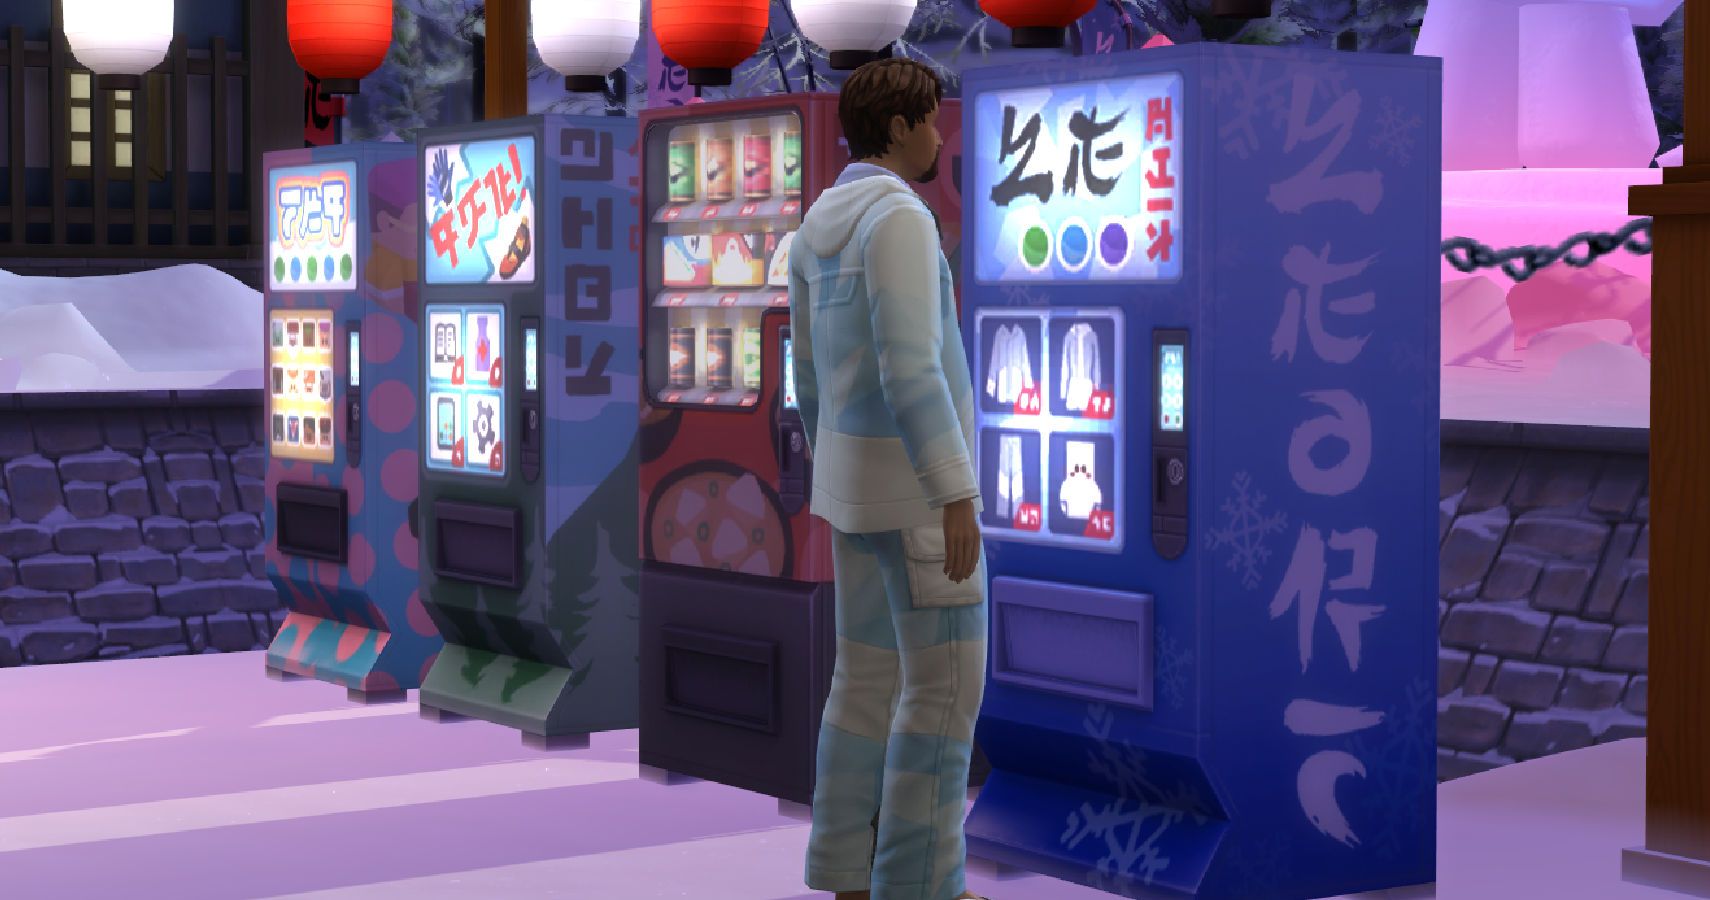 Sim by a vending machine in a snow suit